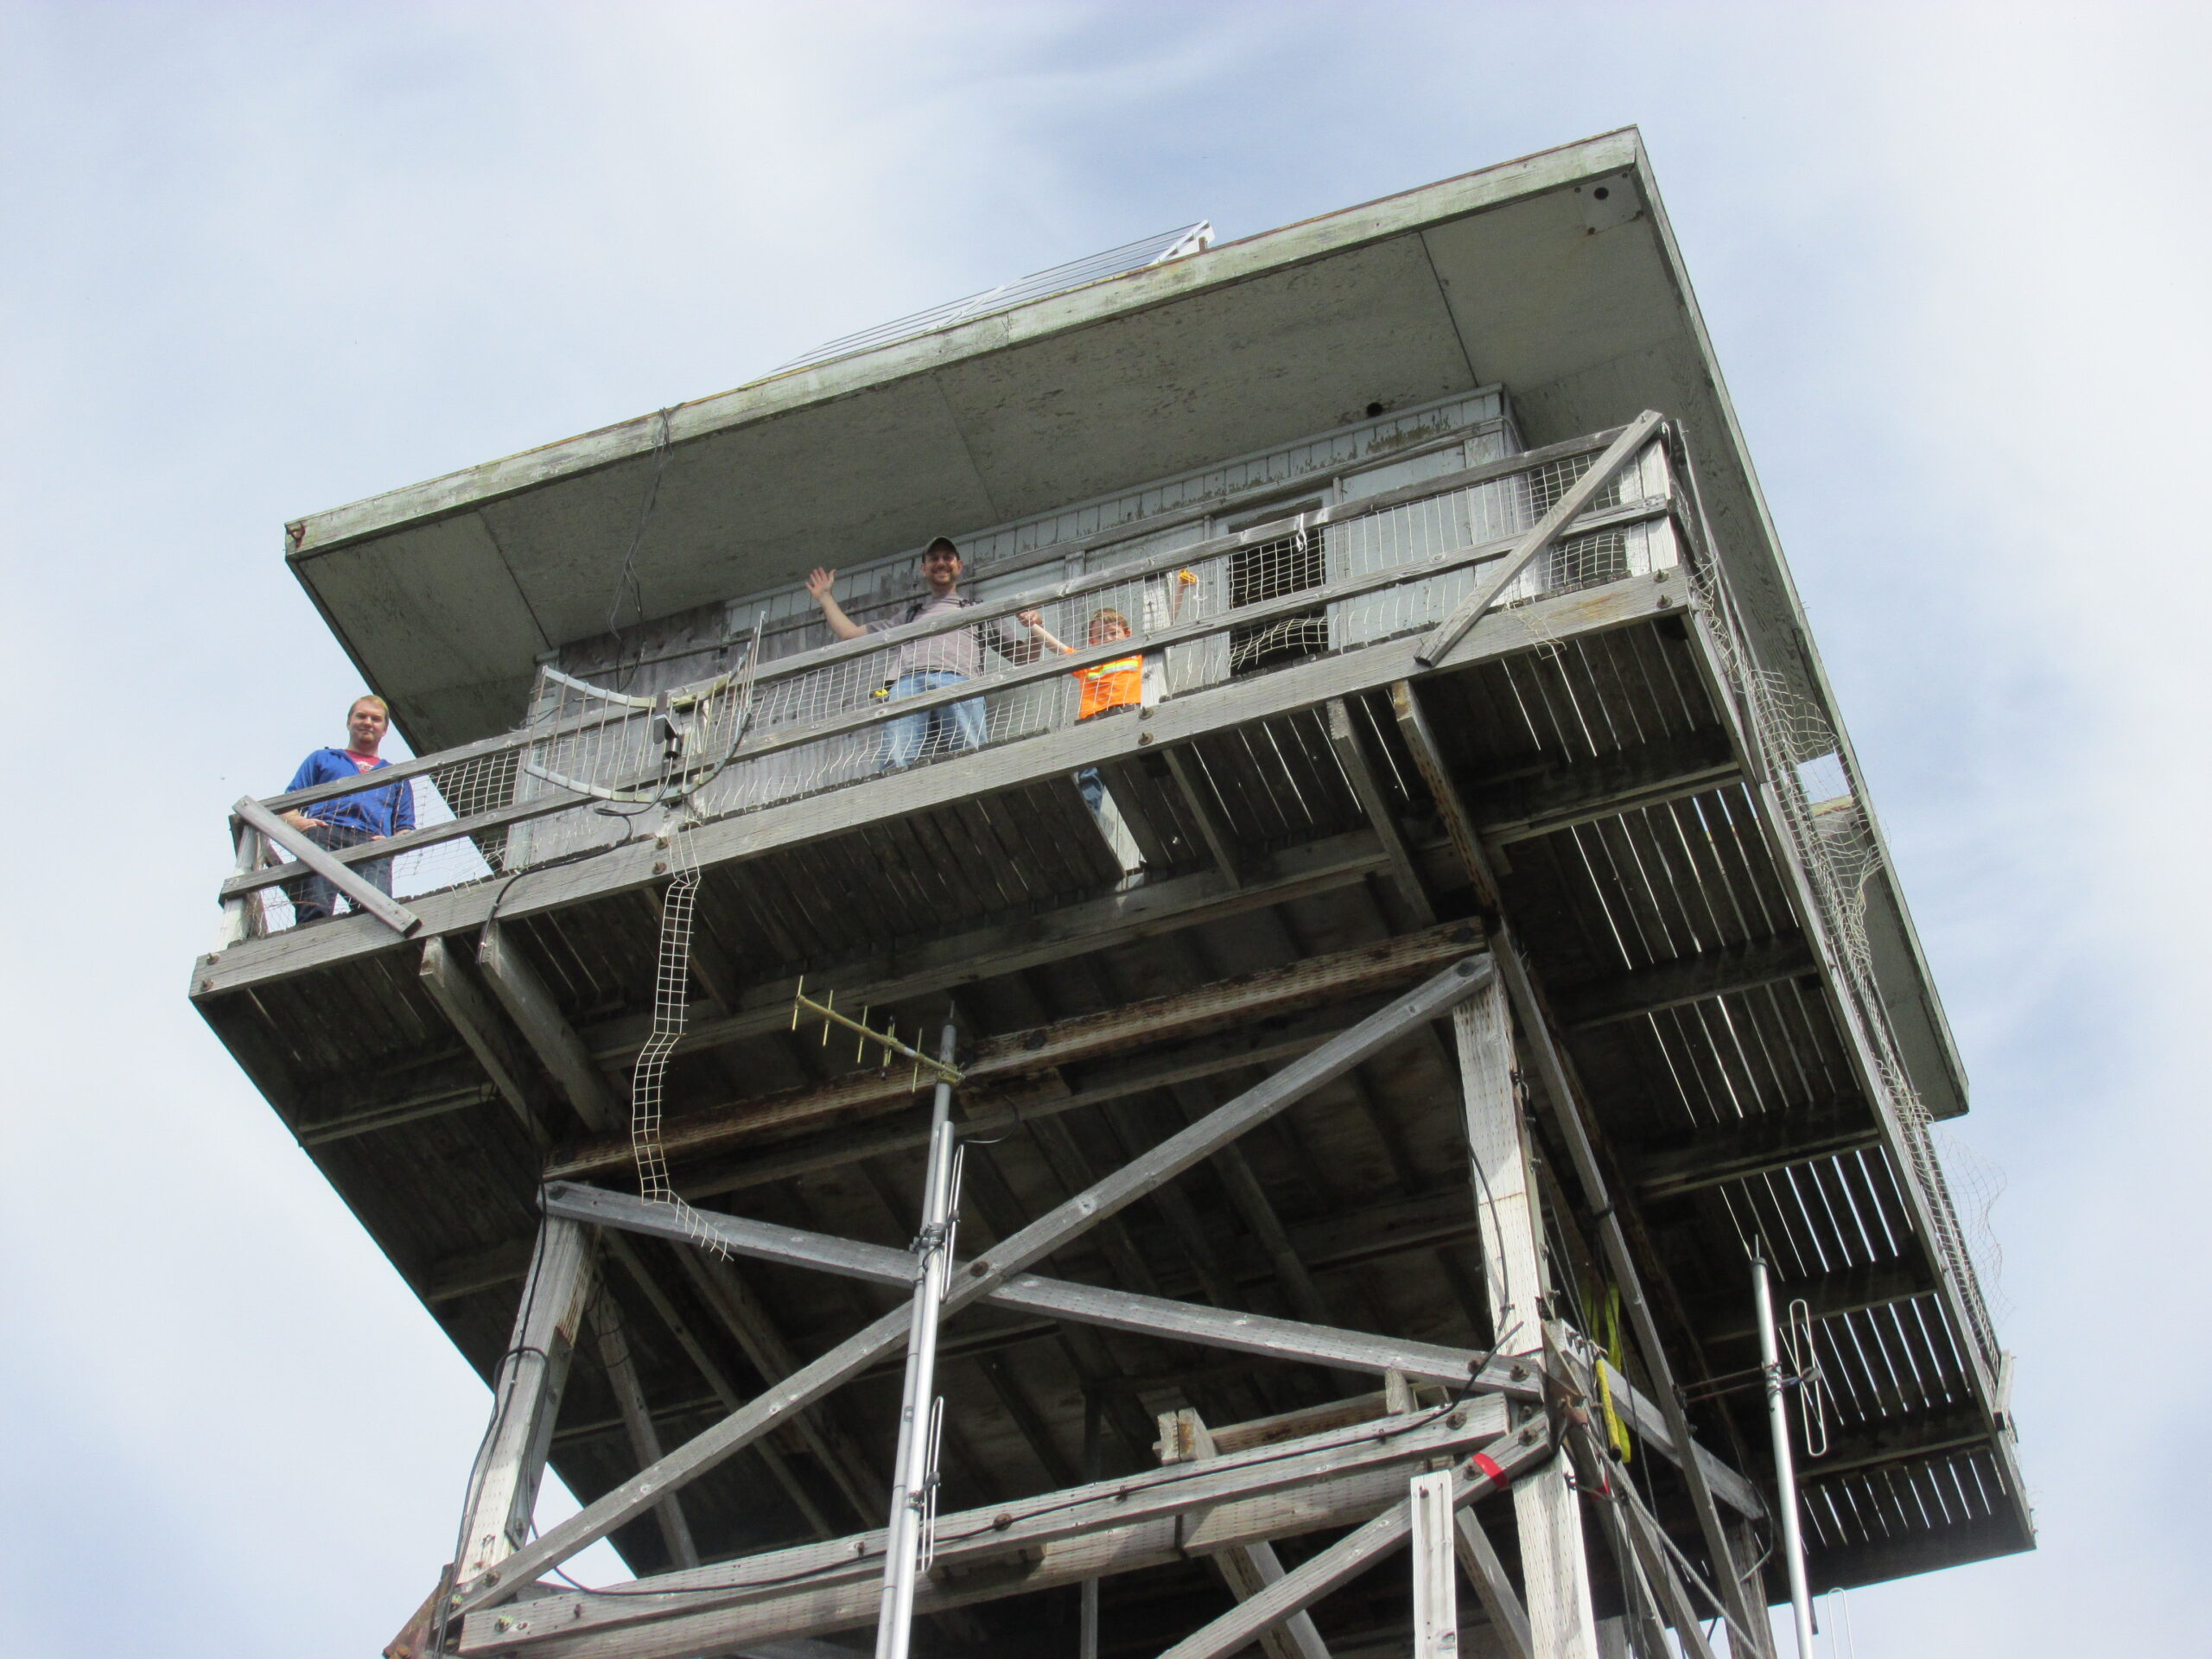 Restoring a fire lookout tower, structural engineering